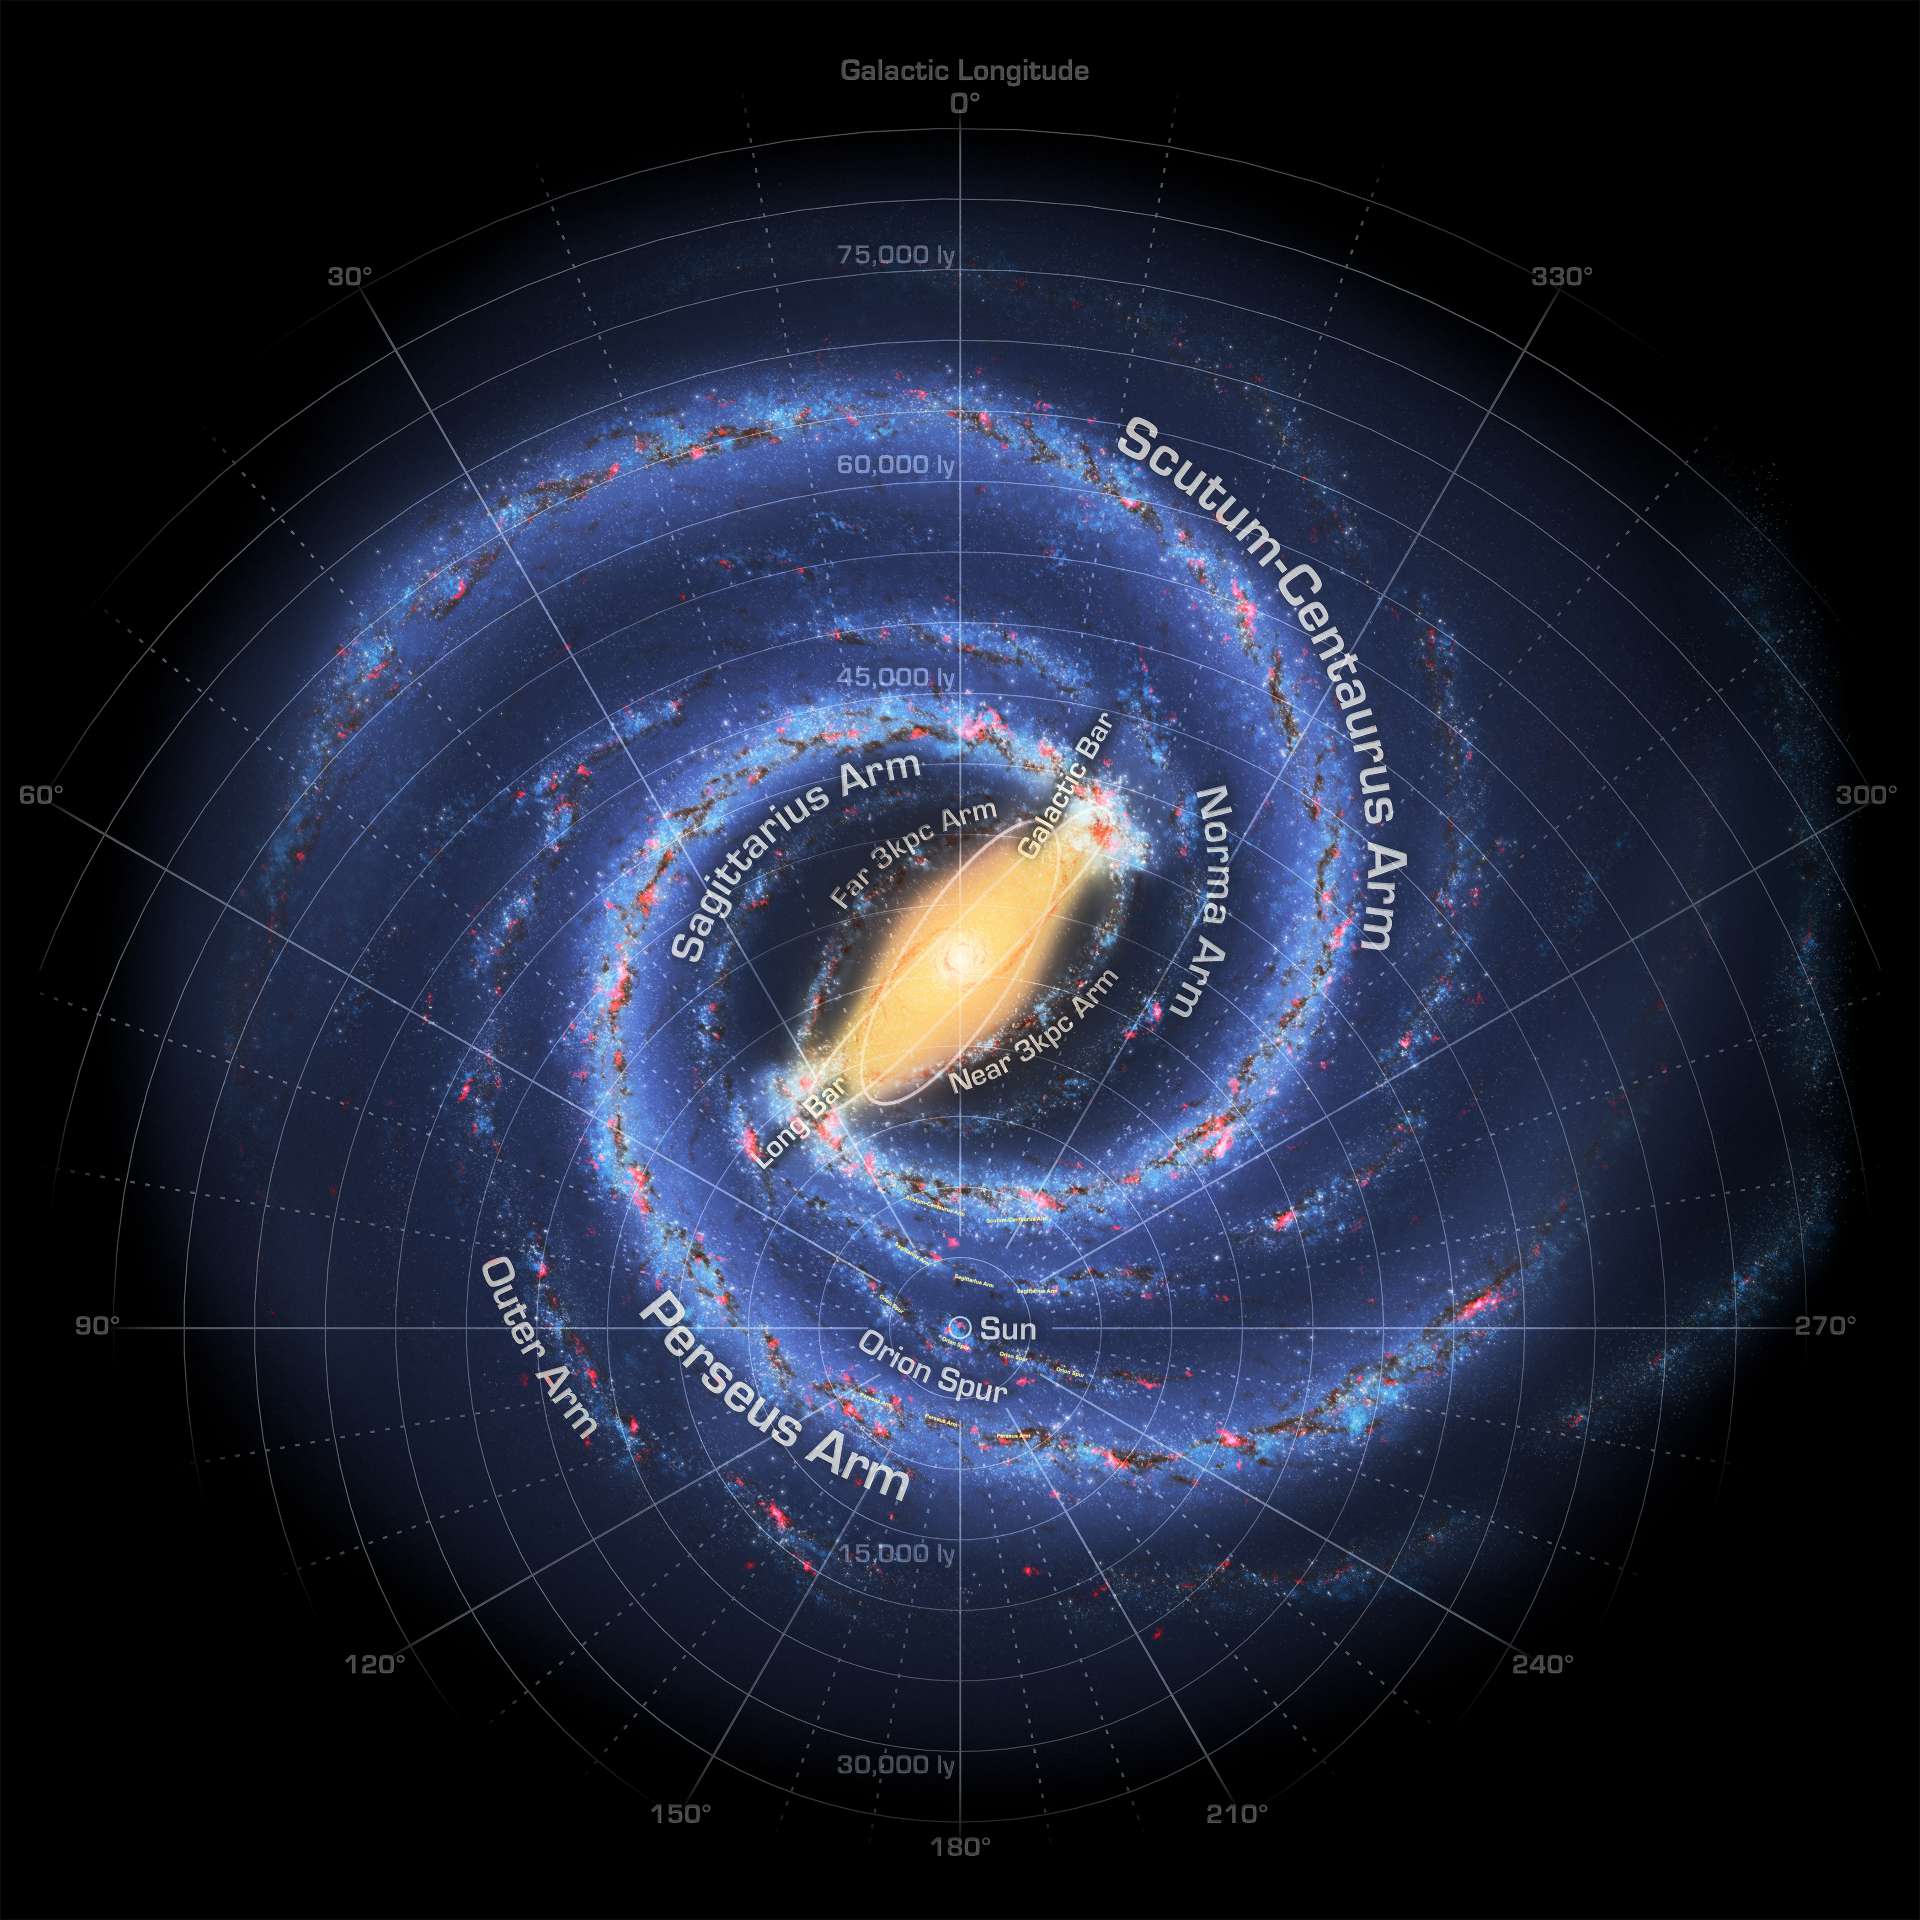 The Galactic Disc